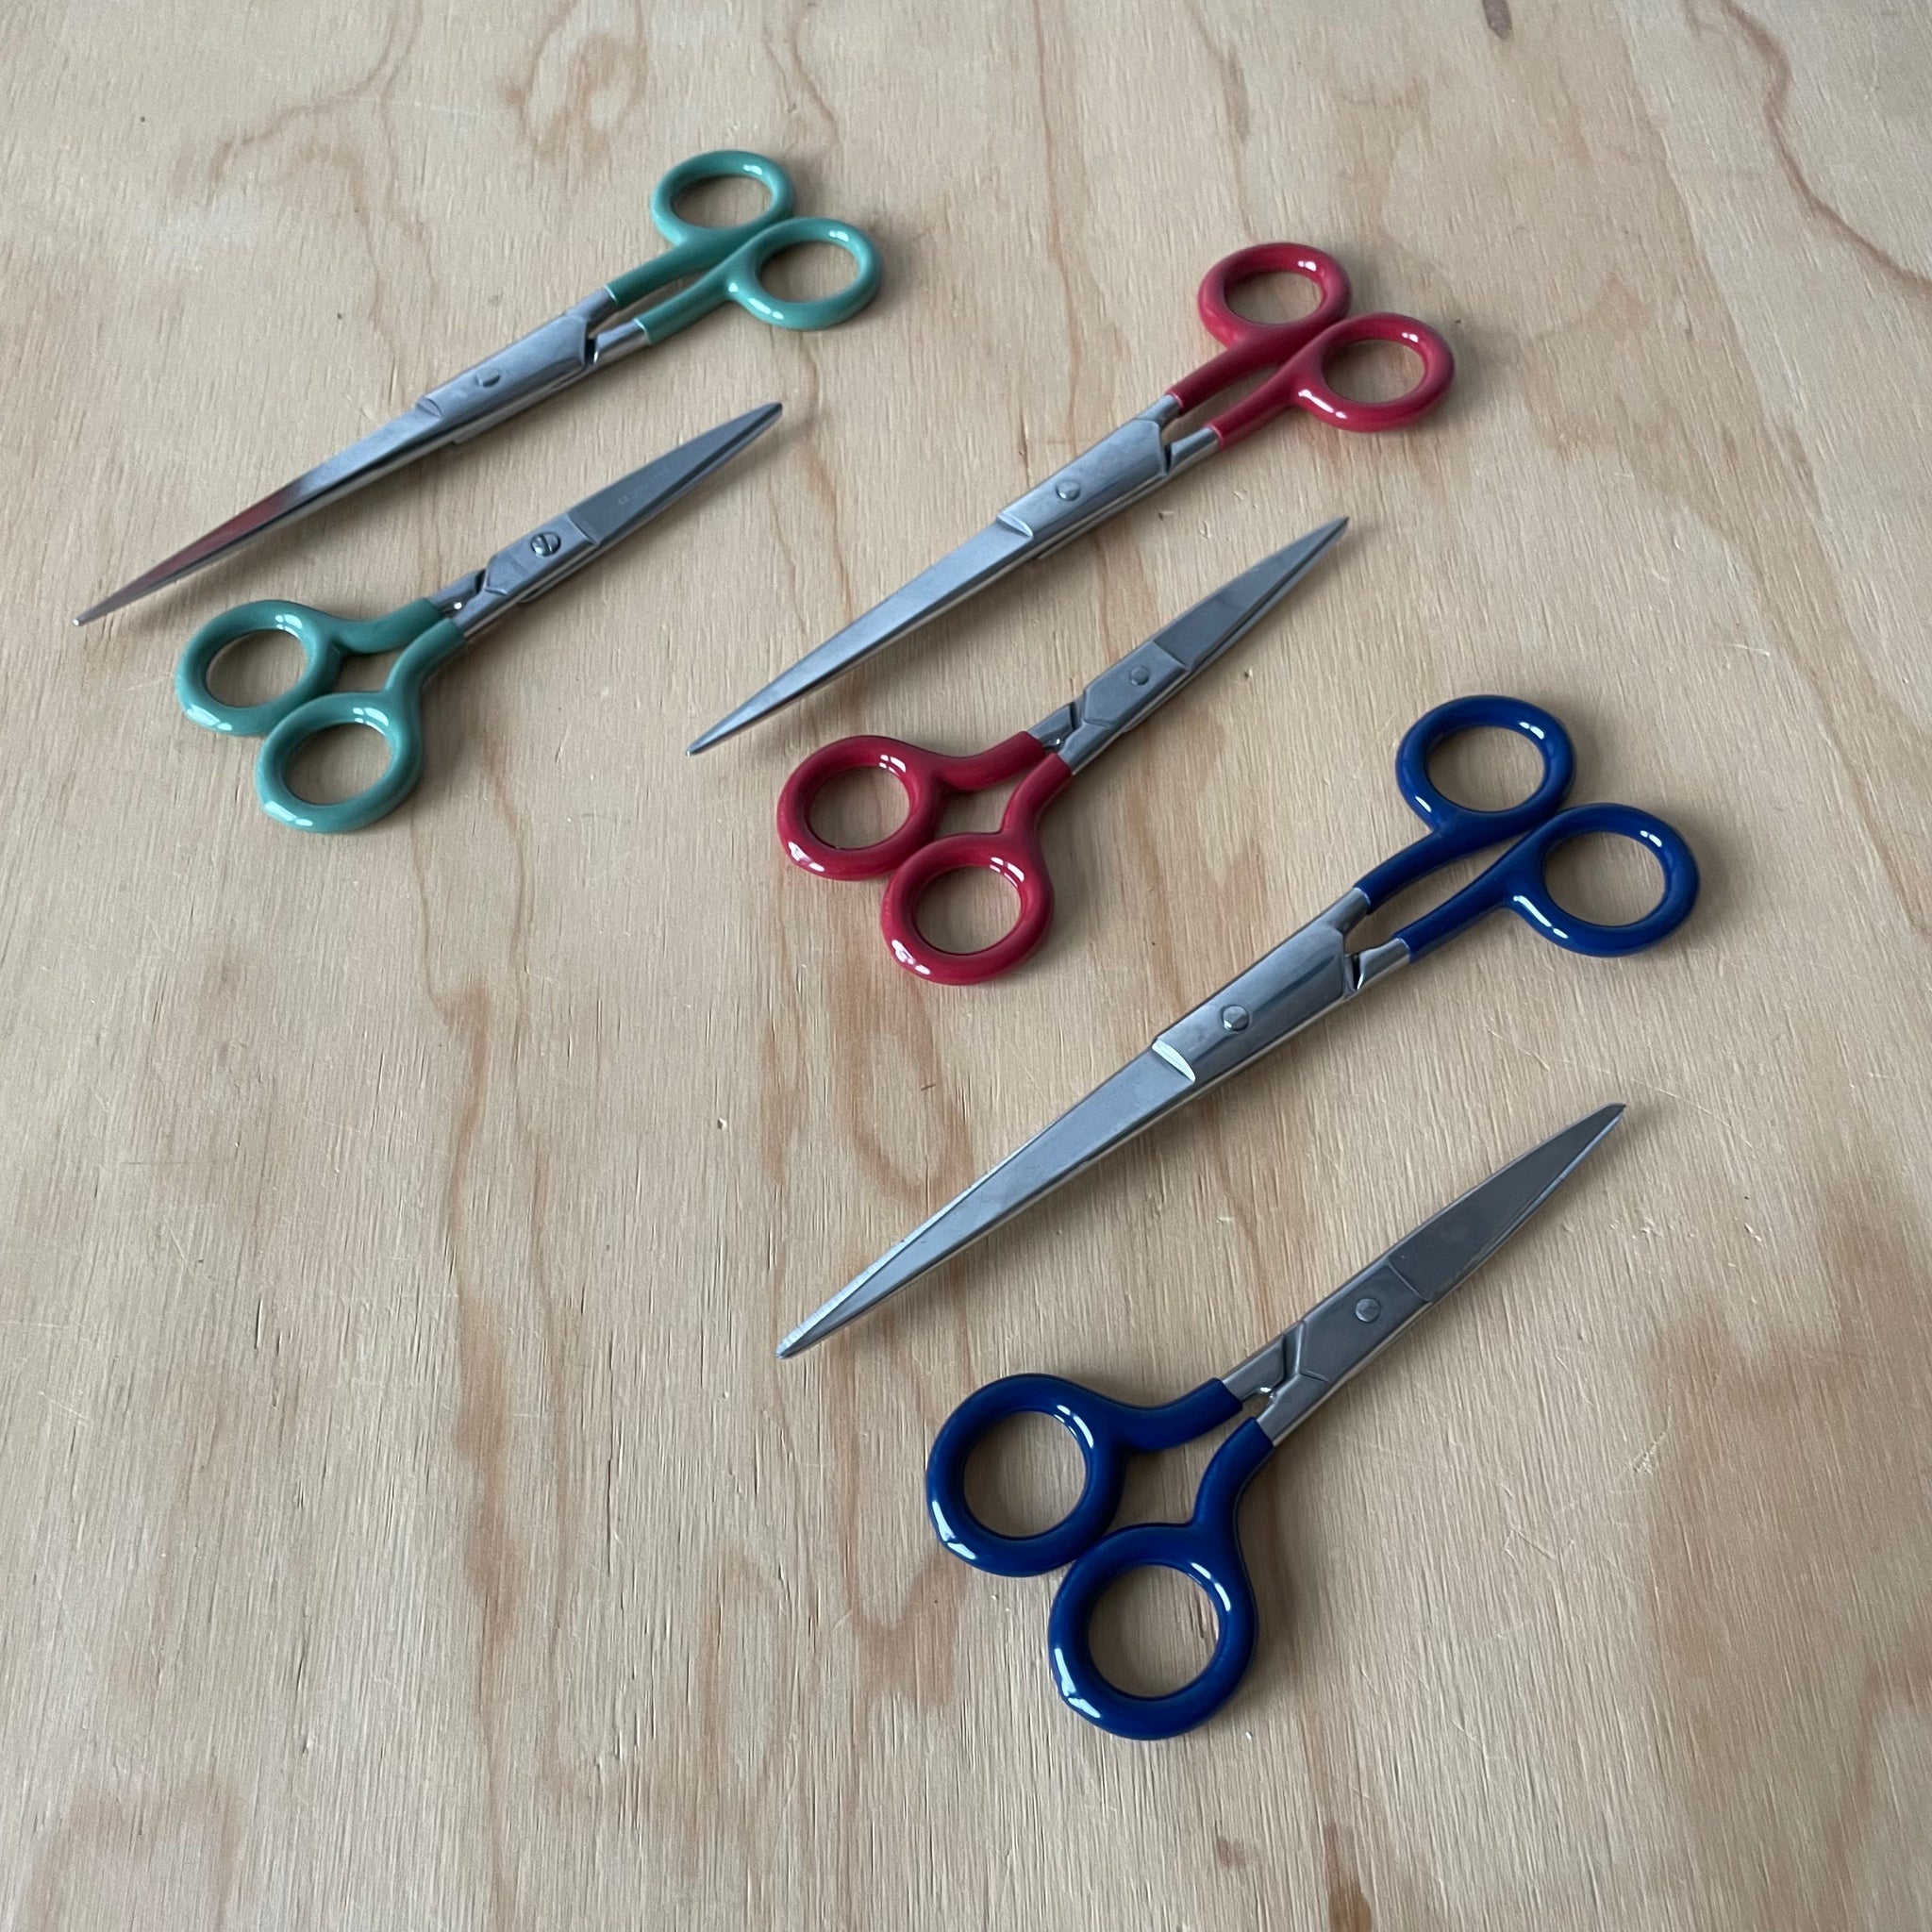 Stainless Steel Scissors by Penco